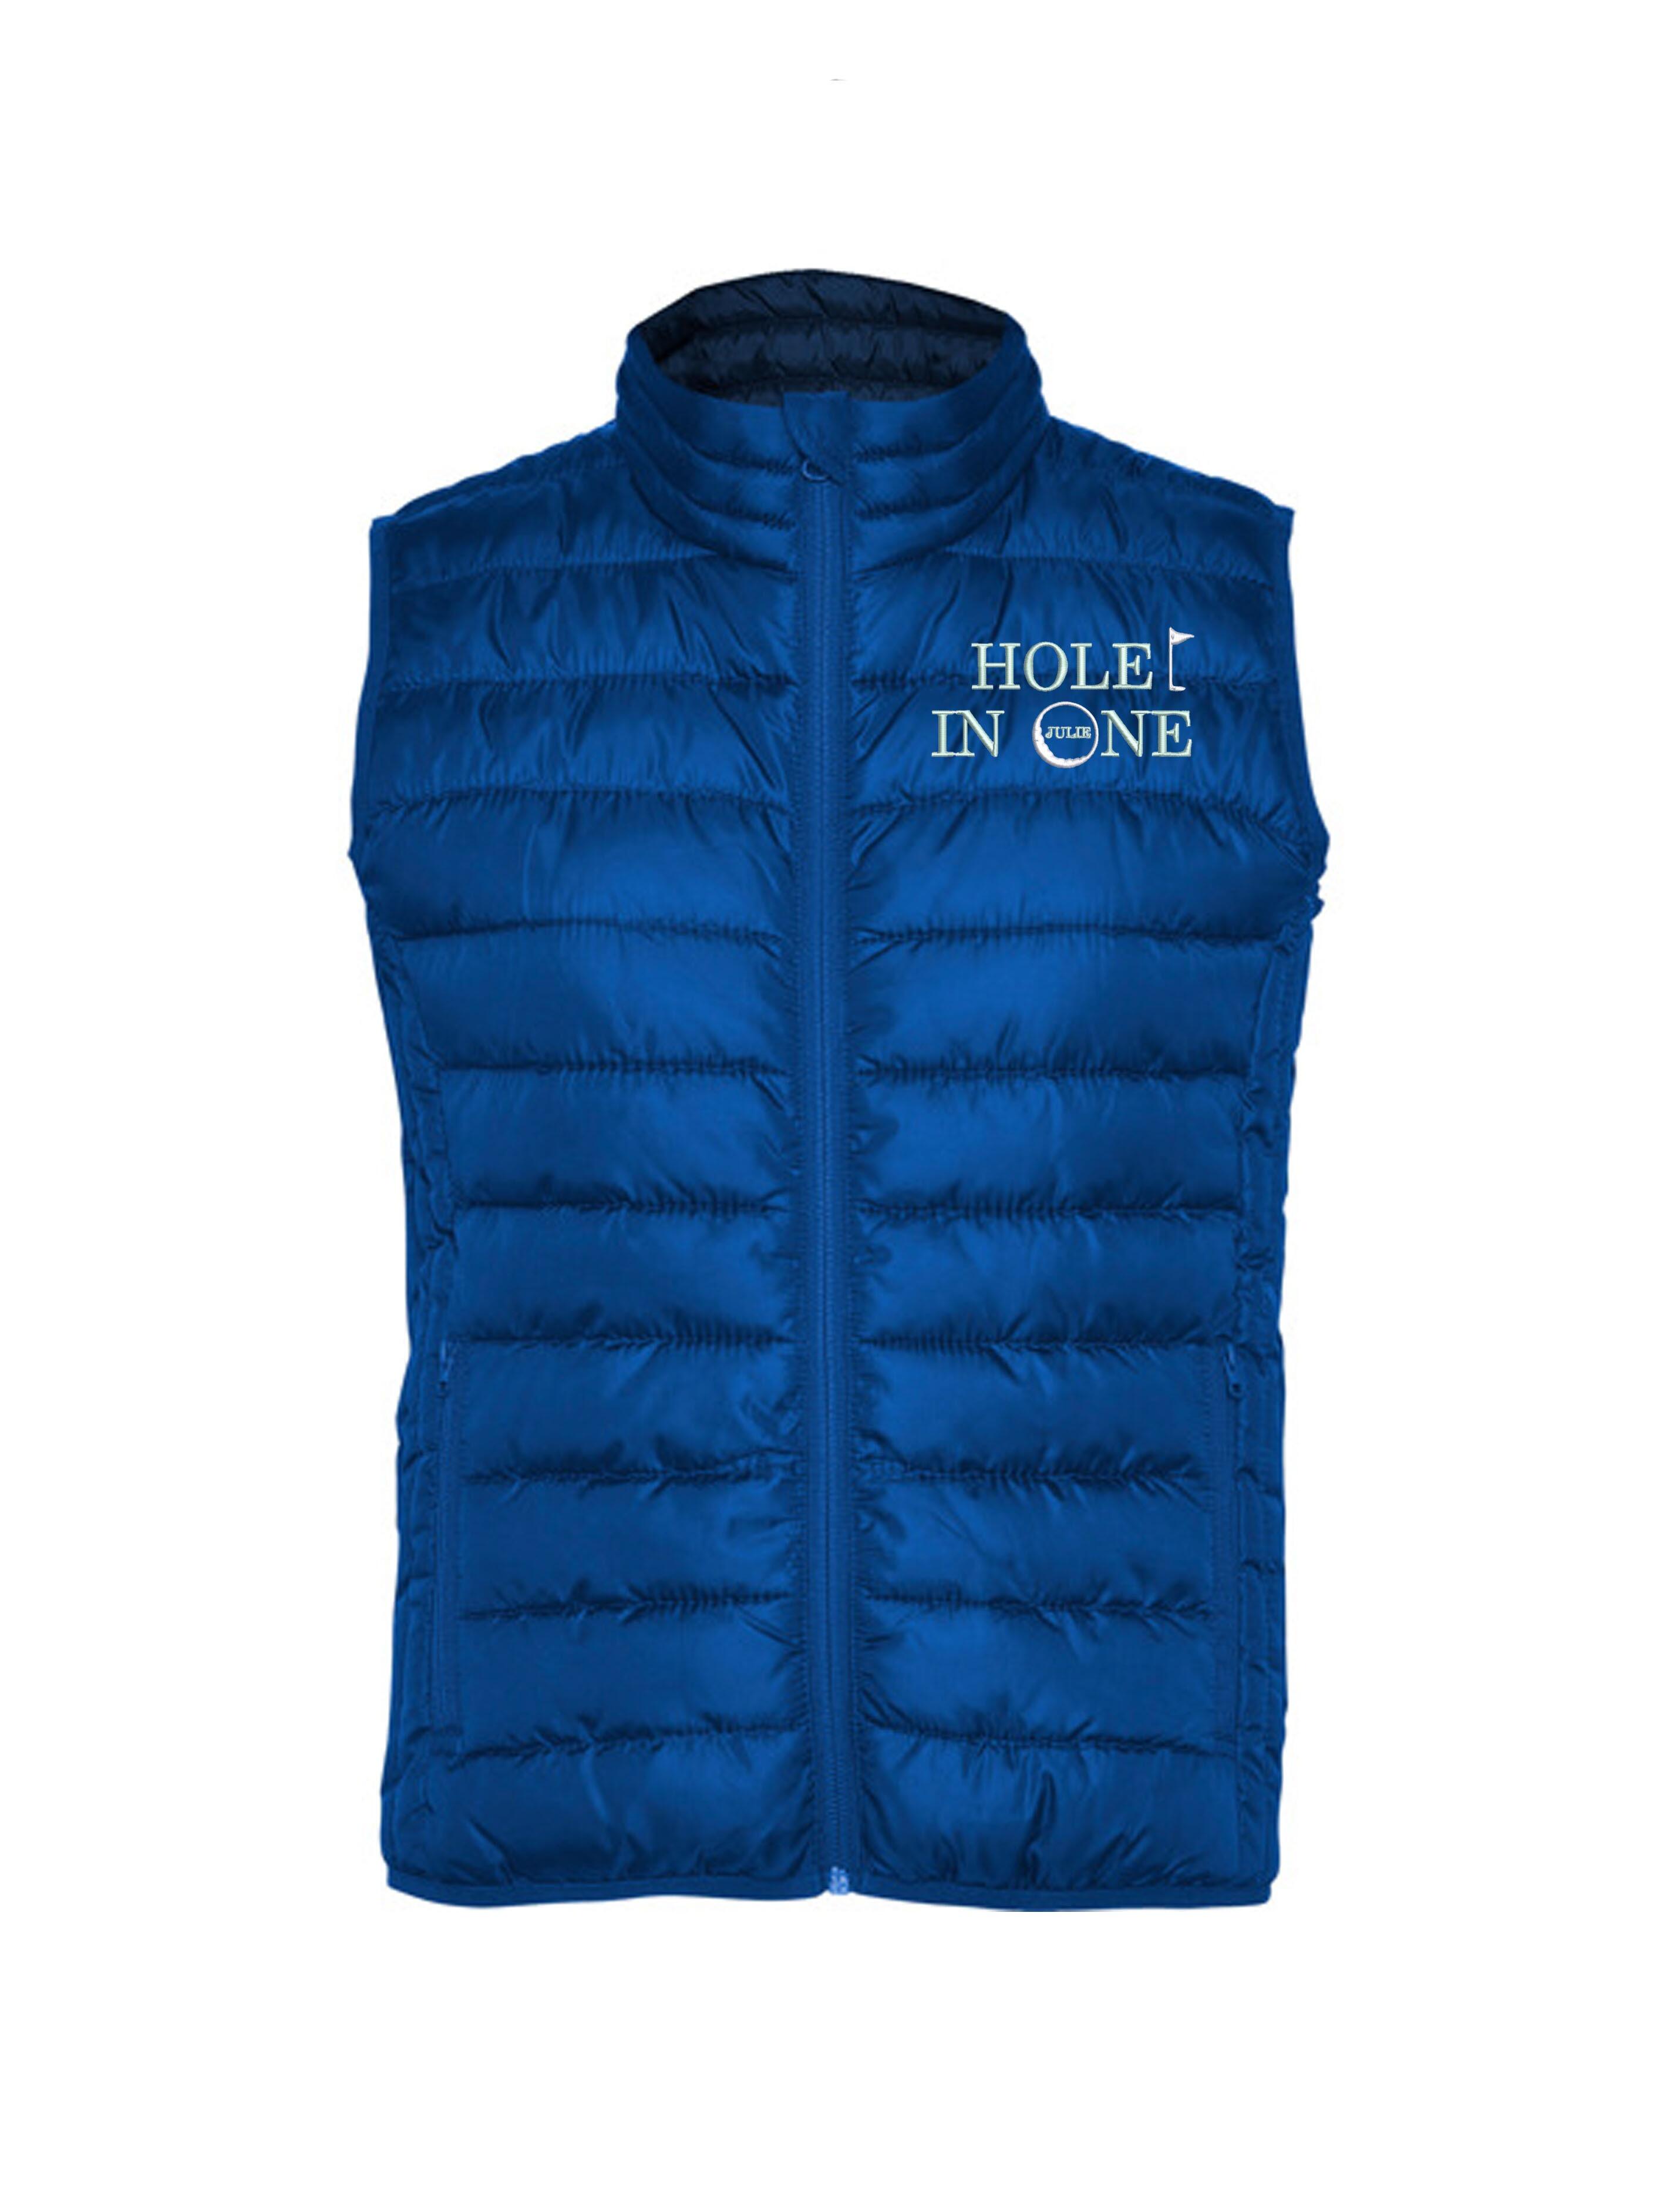 Hole in 1 Design Women's Embroidered Feather Golf Gilet Royal Blue